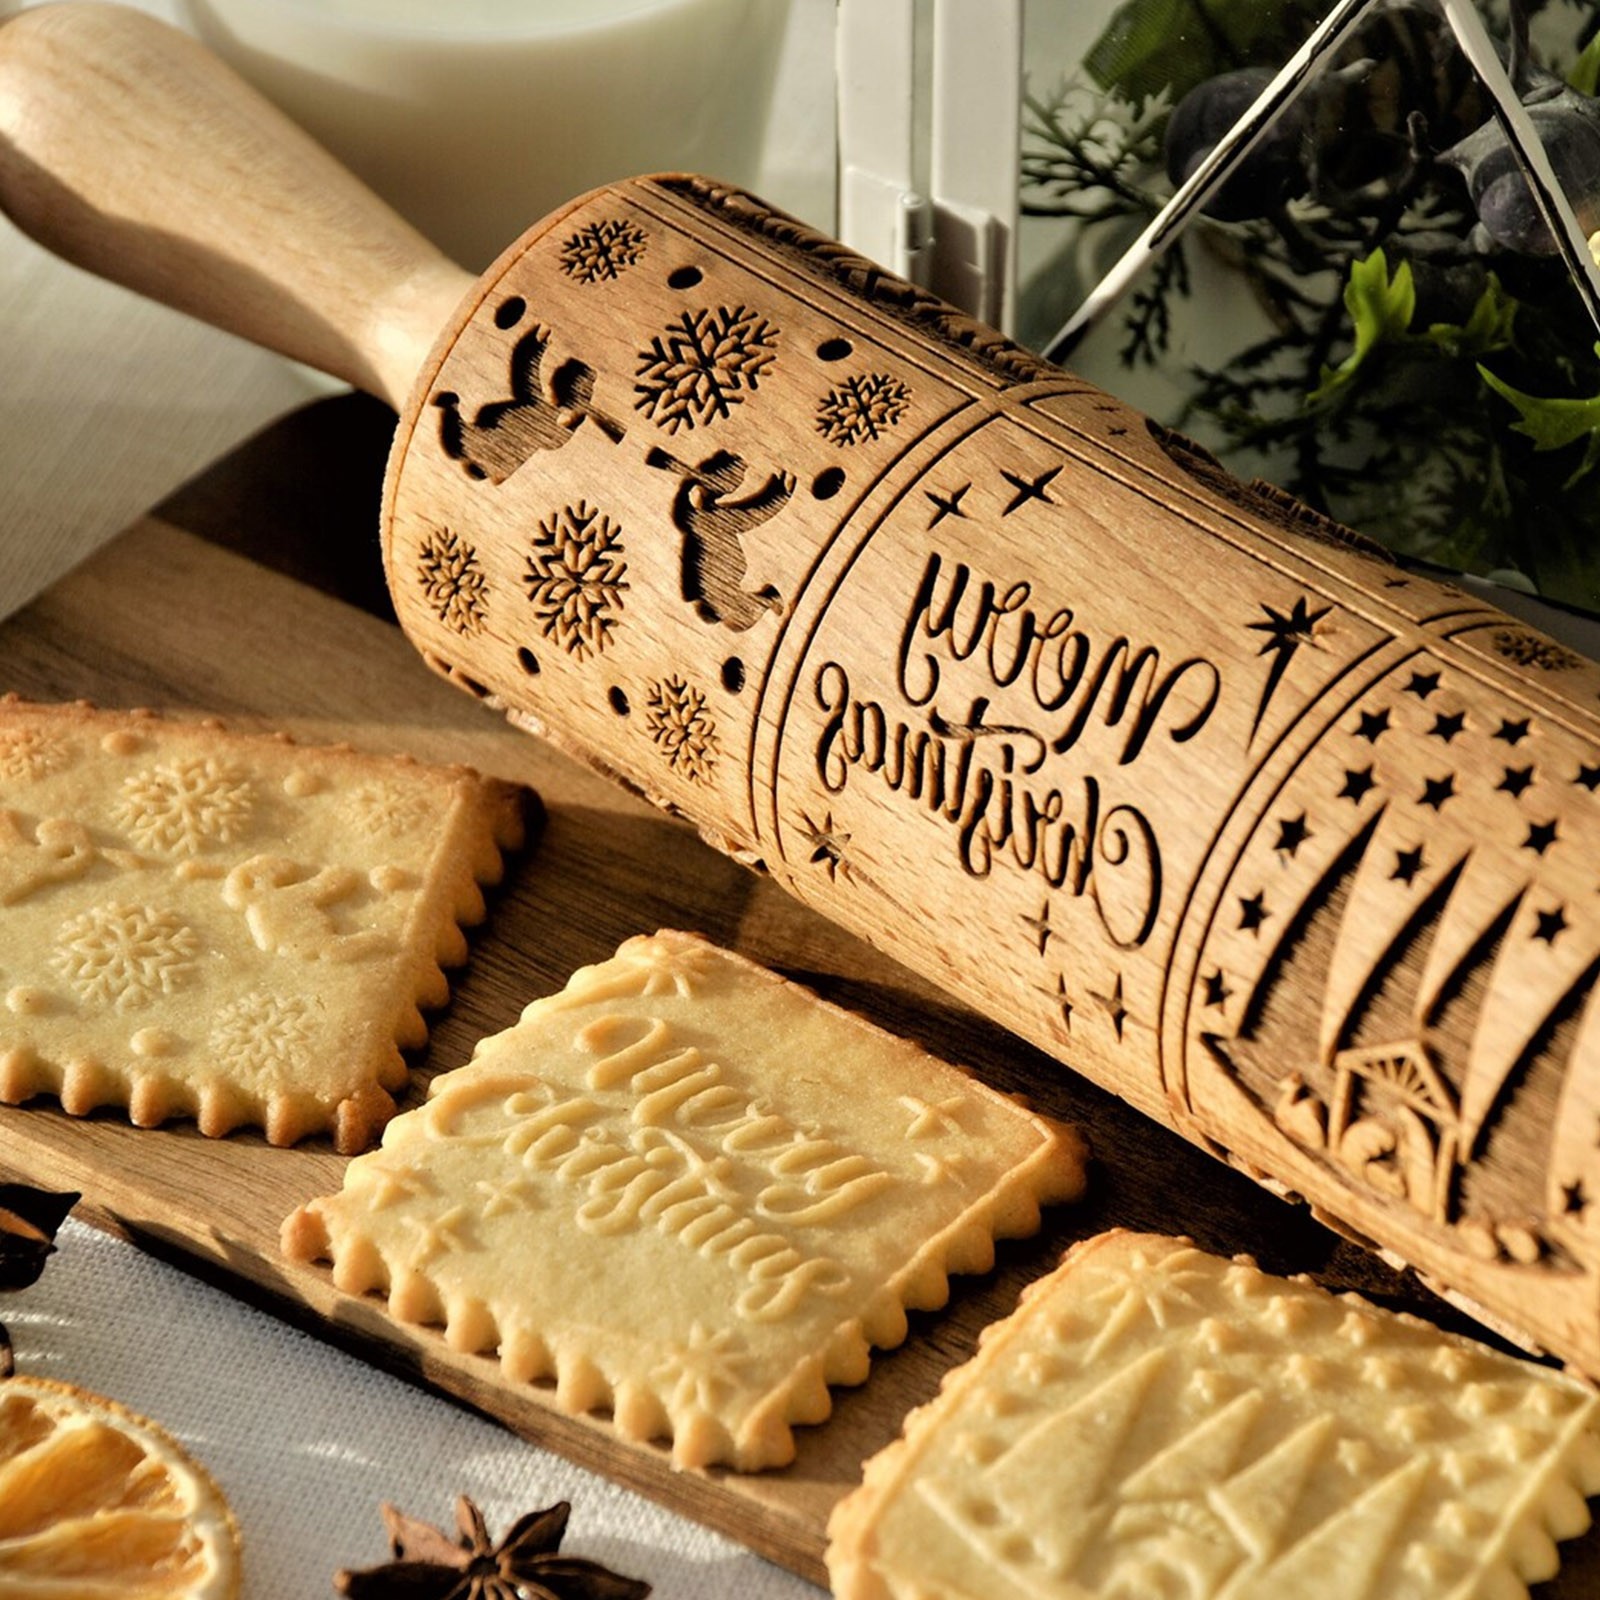 Yiwula Nativity Engraved Rolling Pin Embossed Dough Roller Xmas Cookies Cookie Cutter, As Shown